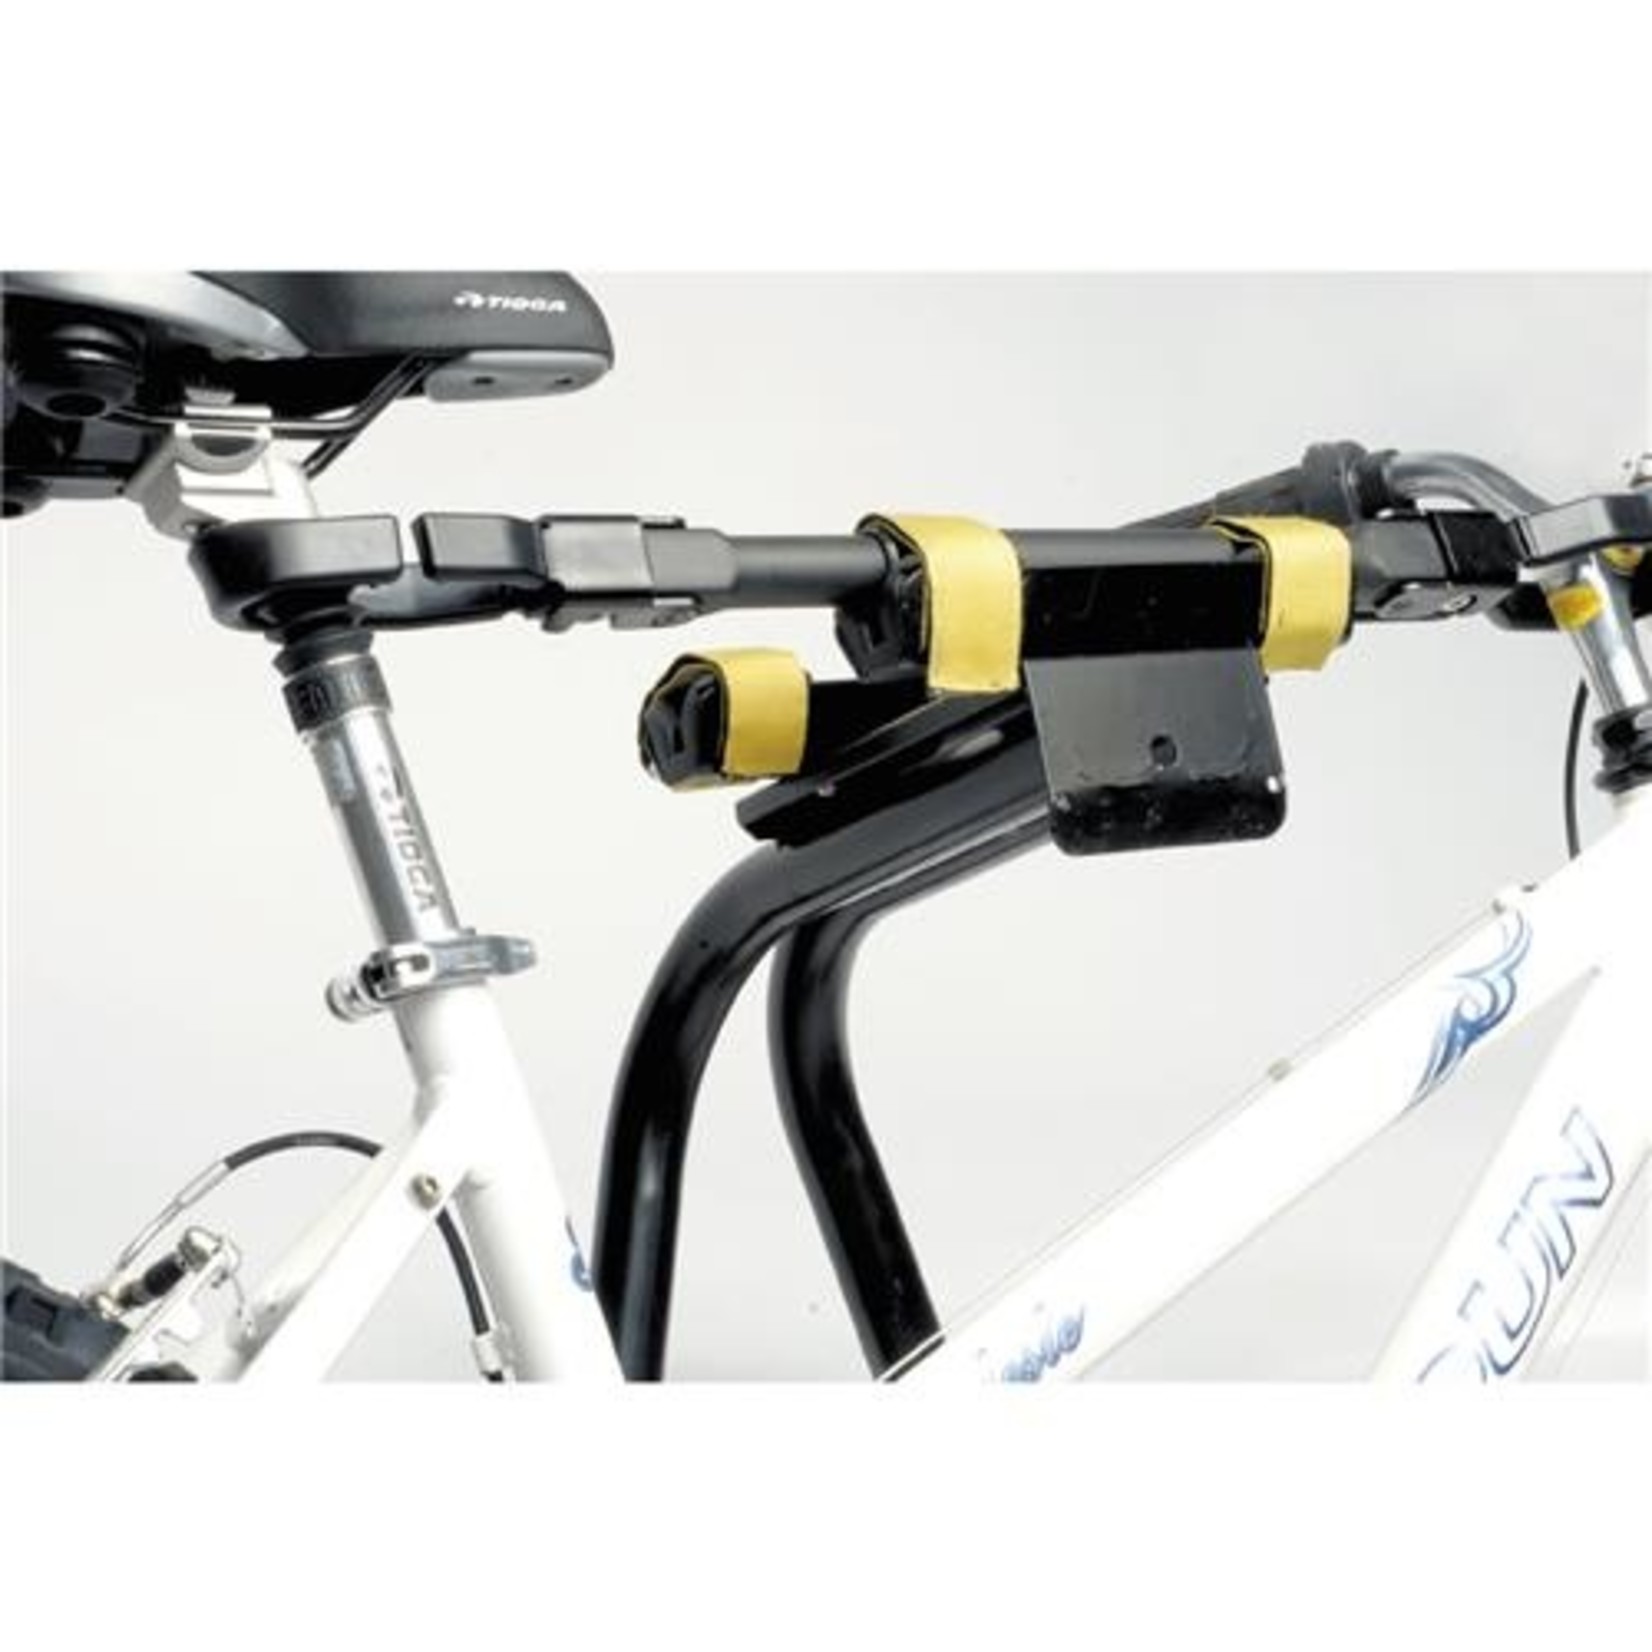 Bikecorp Pacific Deluxe Bar Adaptor - 15kg For Full Suspension - Black